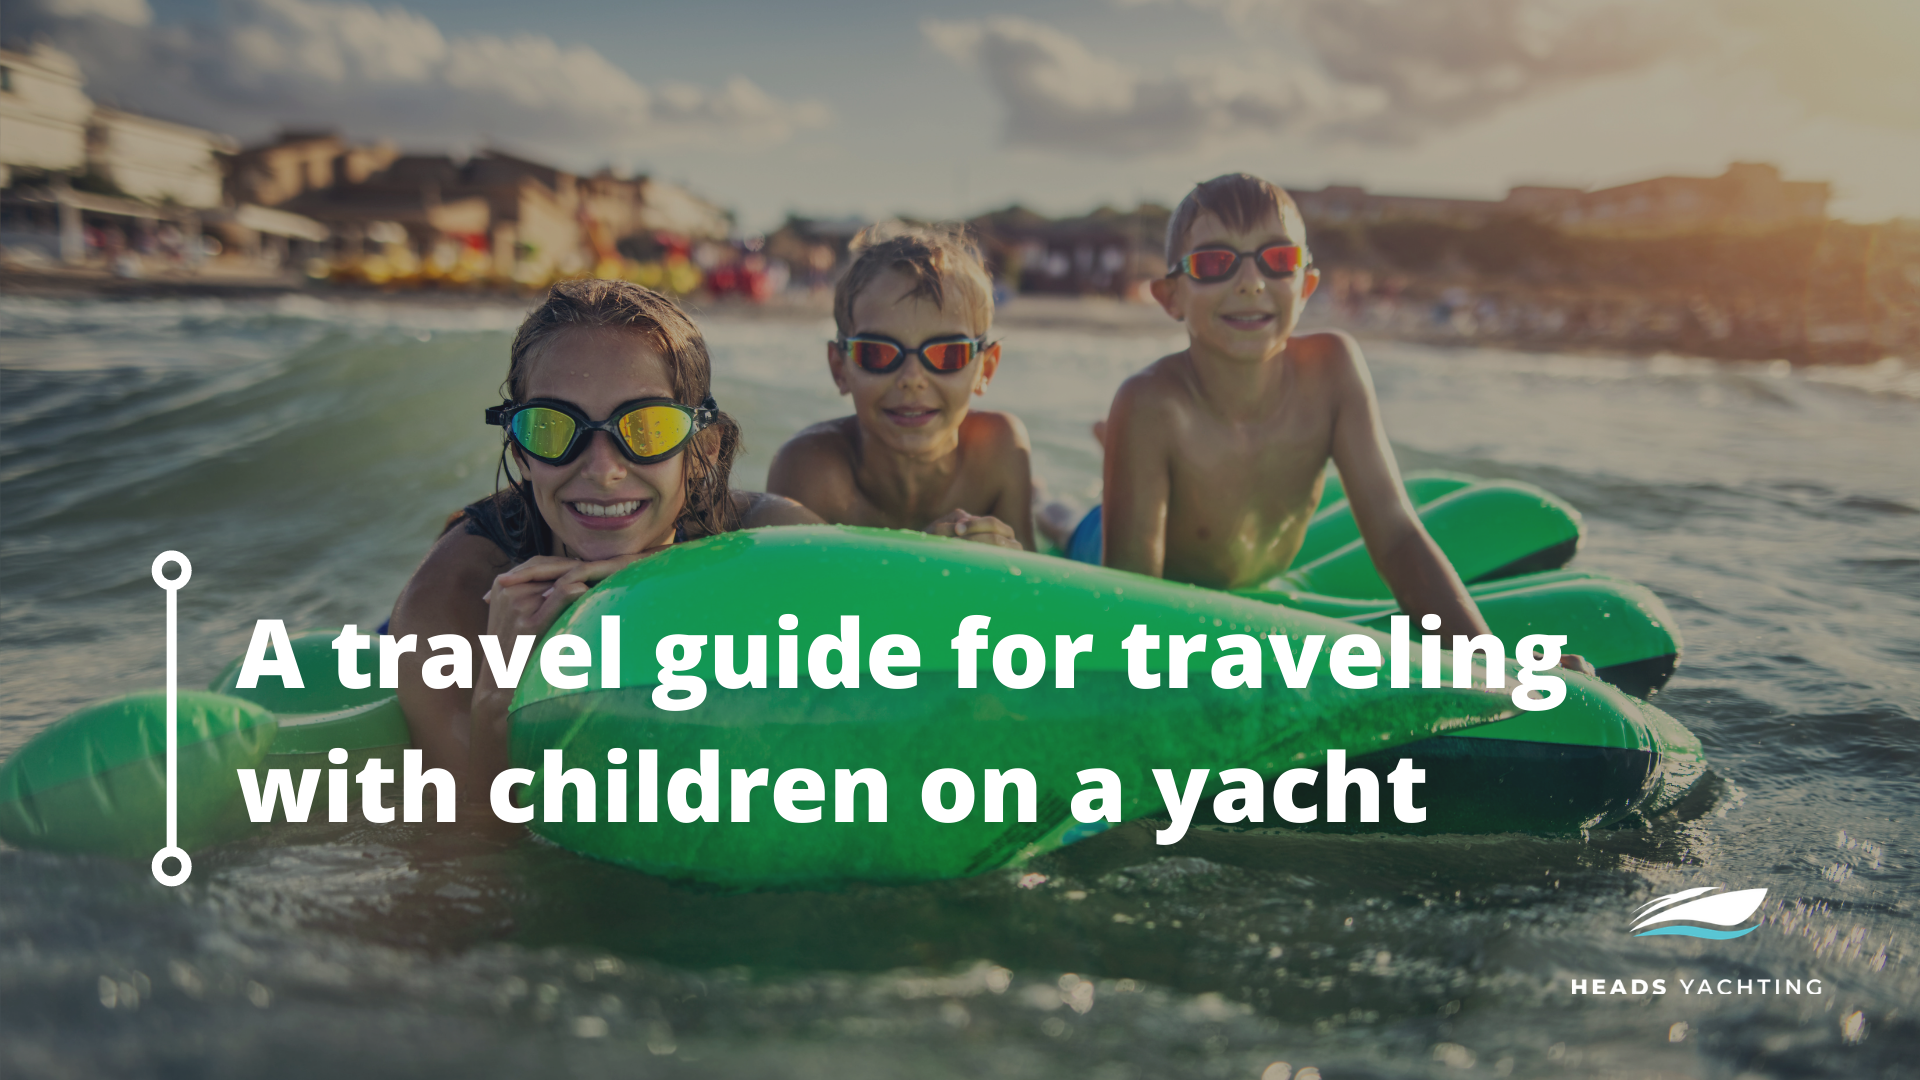 Traveling with children on a yacht - Guide